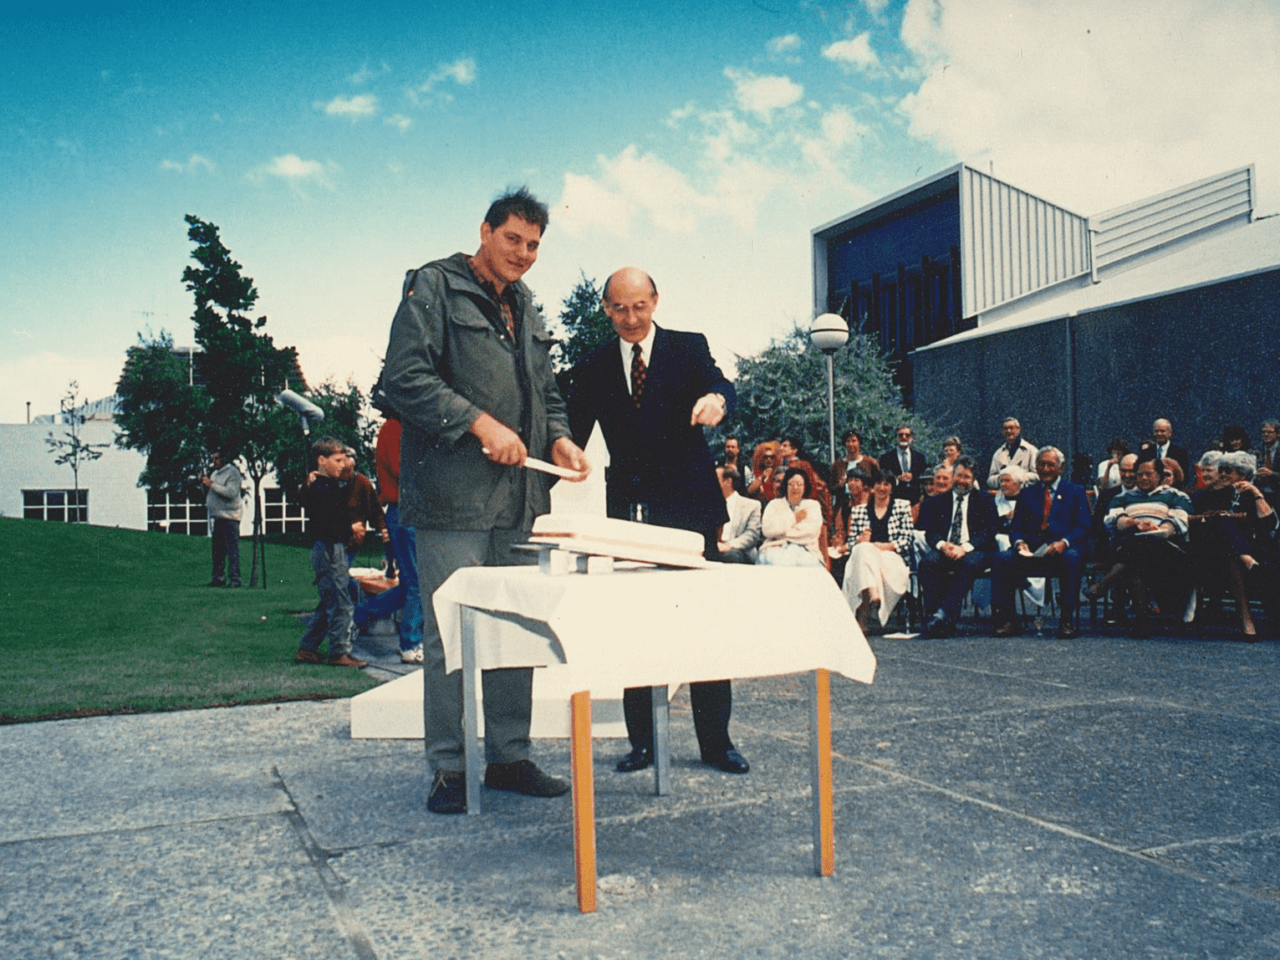 Sculptor Paul Dibble and Mayor, Rieger cut a celebration cake outside